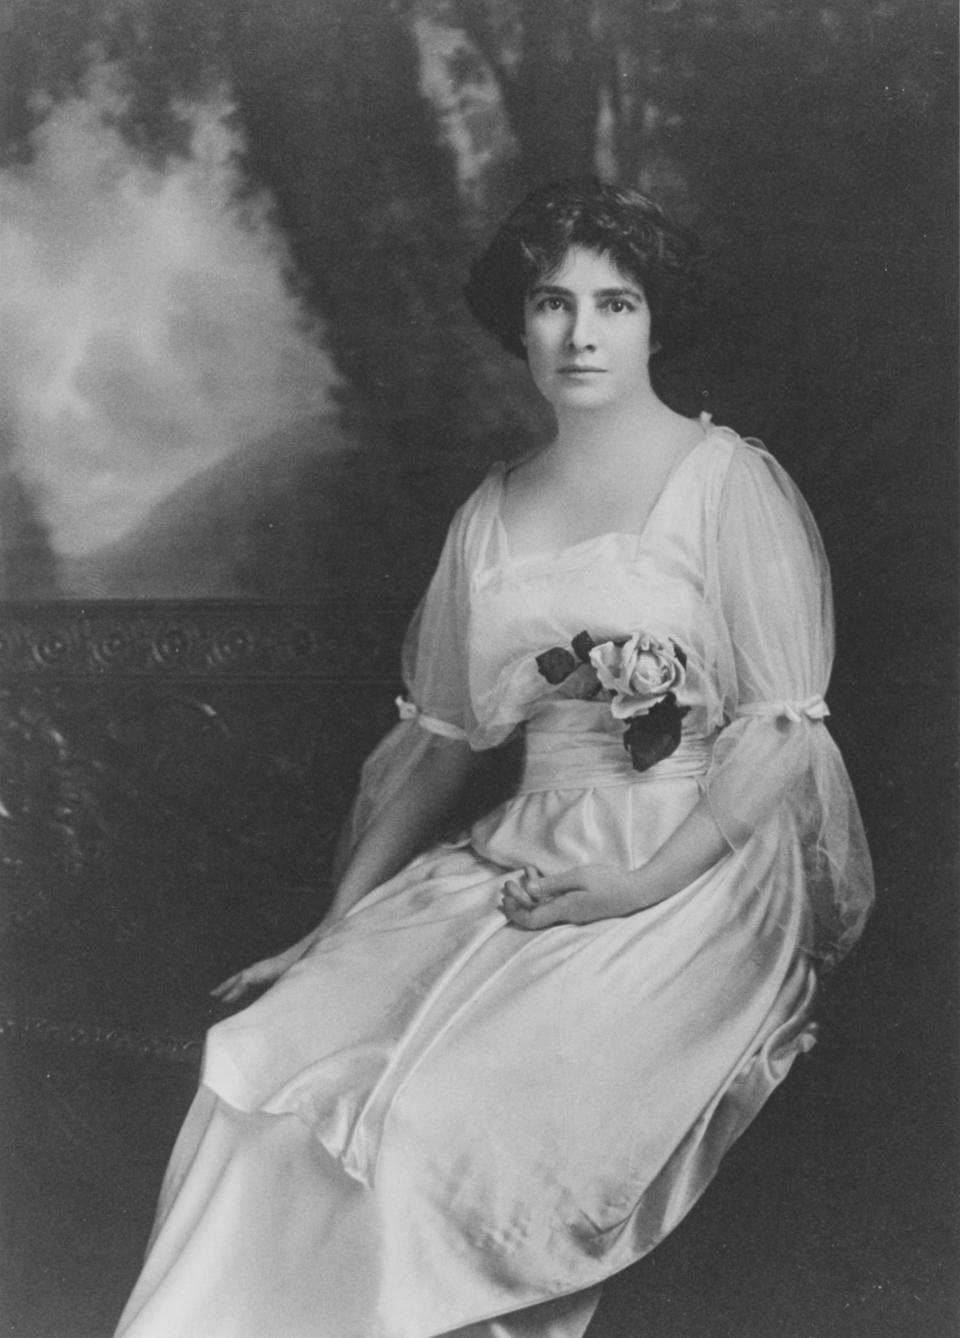 Clara Clemens, daughter of Mark Twain, studied piano and was a singer. She performed at Park Church in Elmira in 1907.